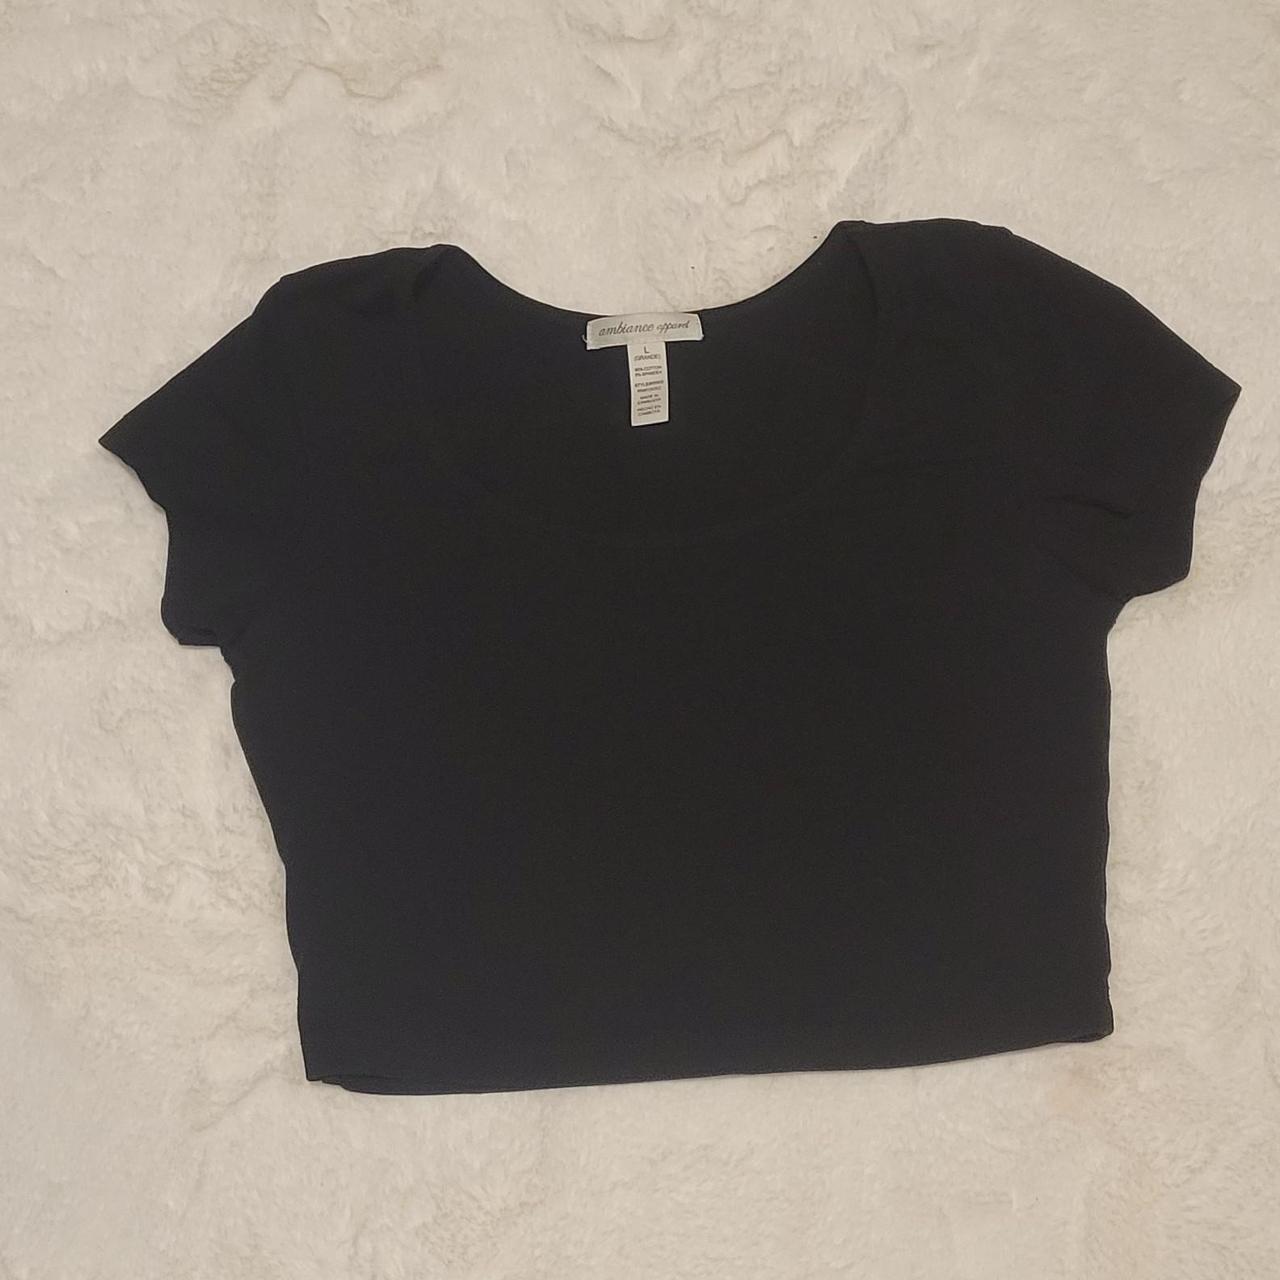 Ambiance apparel stretchy black crop top with cap - Depop